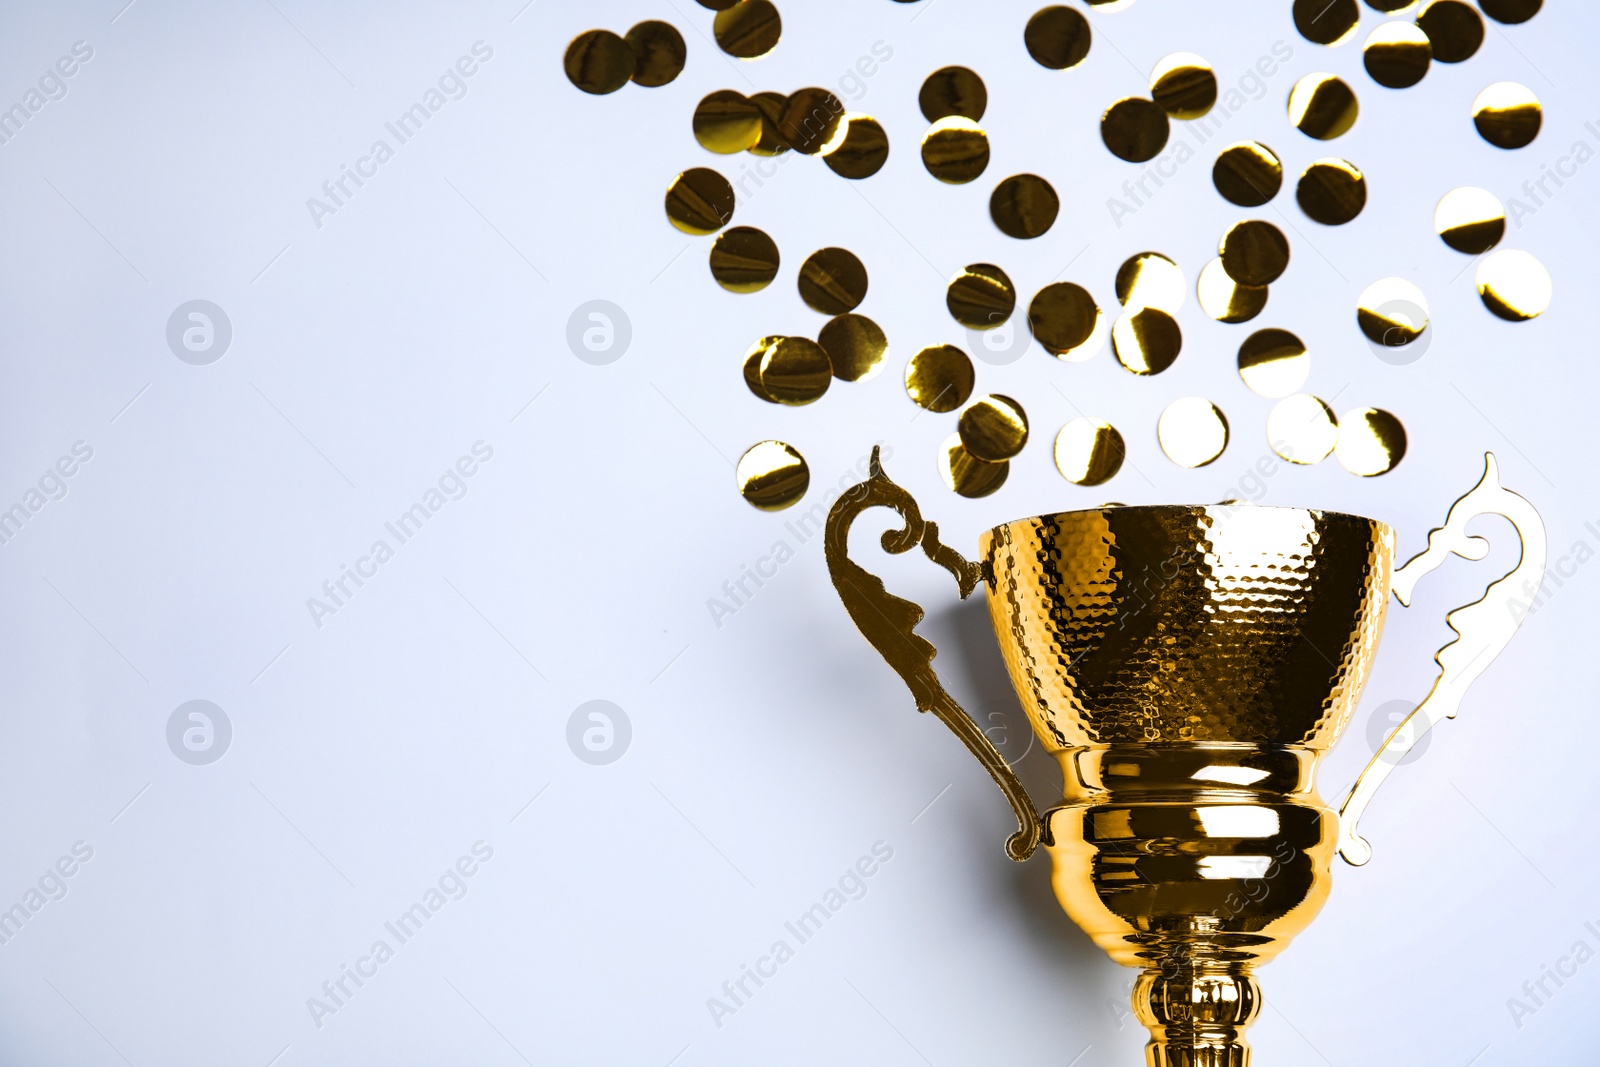 Photo of Gold trophy cup and confetti on white background, top view